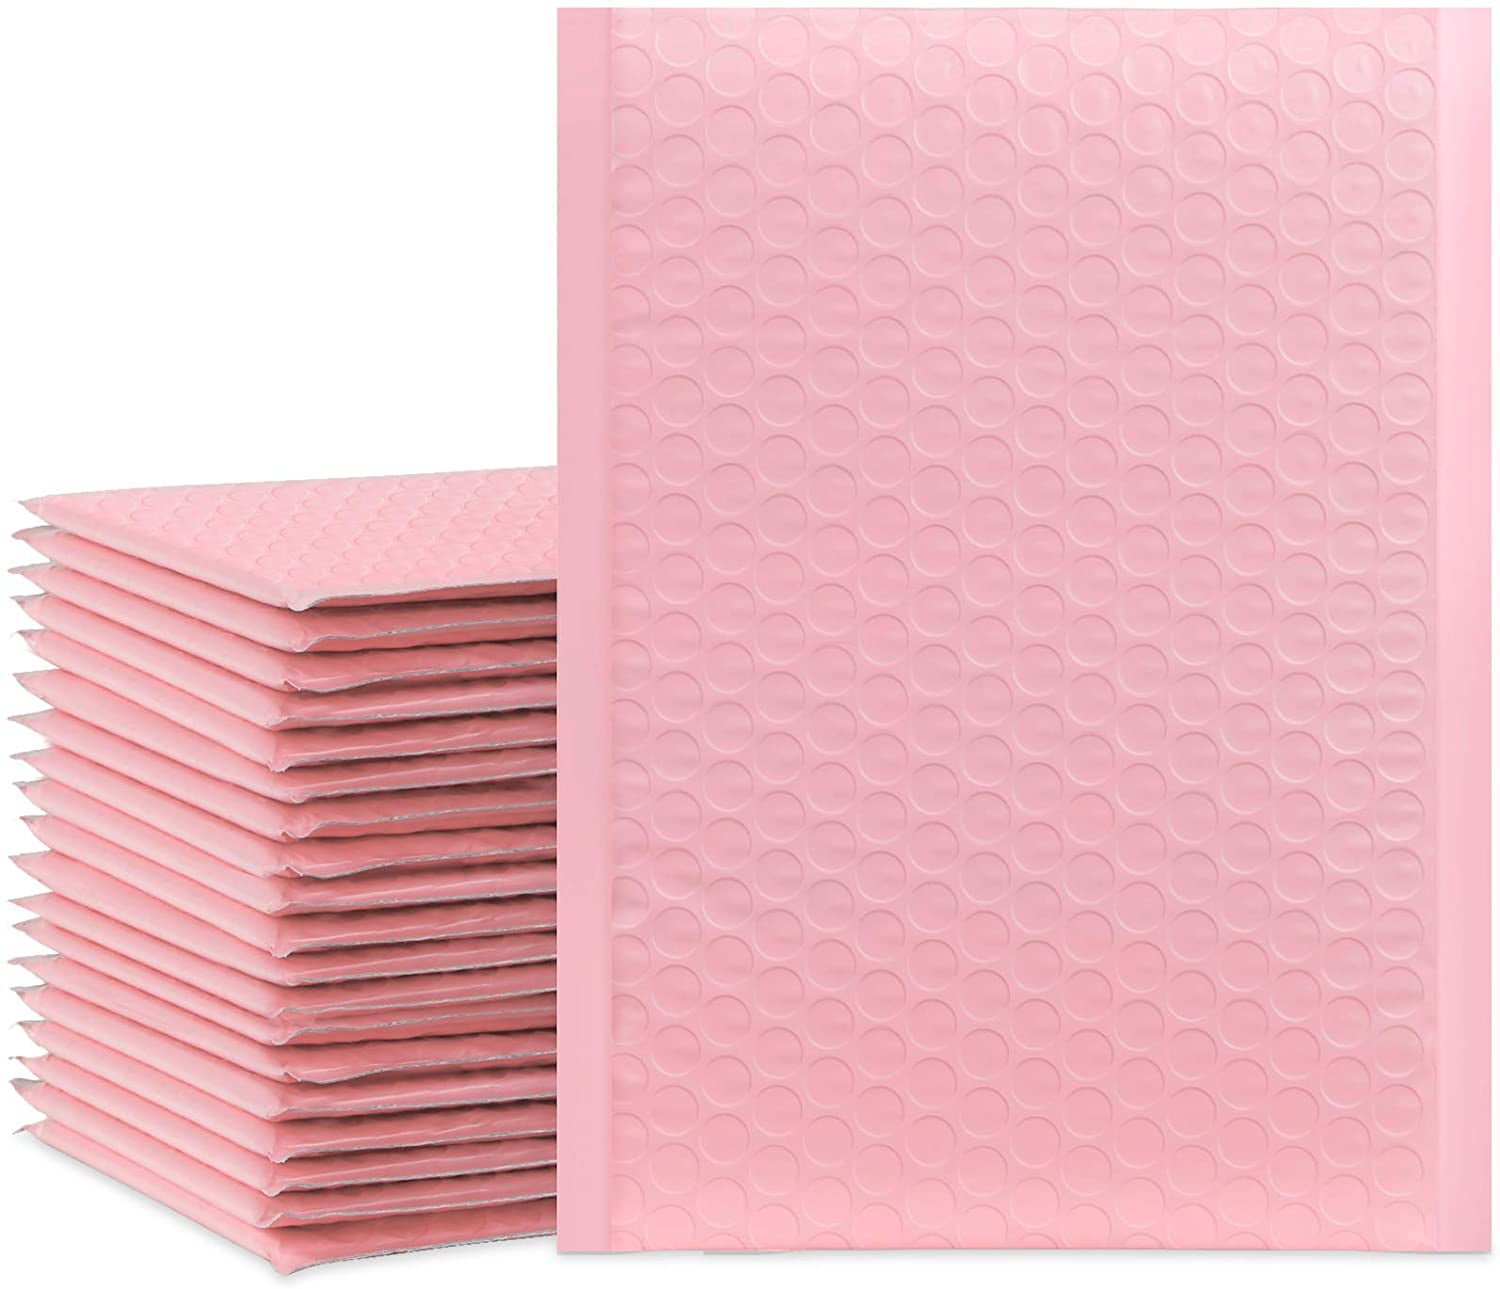 4x6 HOT PINK POLY MAILERS Shipping Envelopes Self Sealing Mailing Bags 4" x 6" 